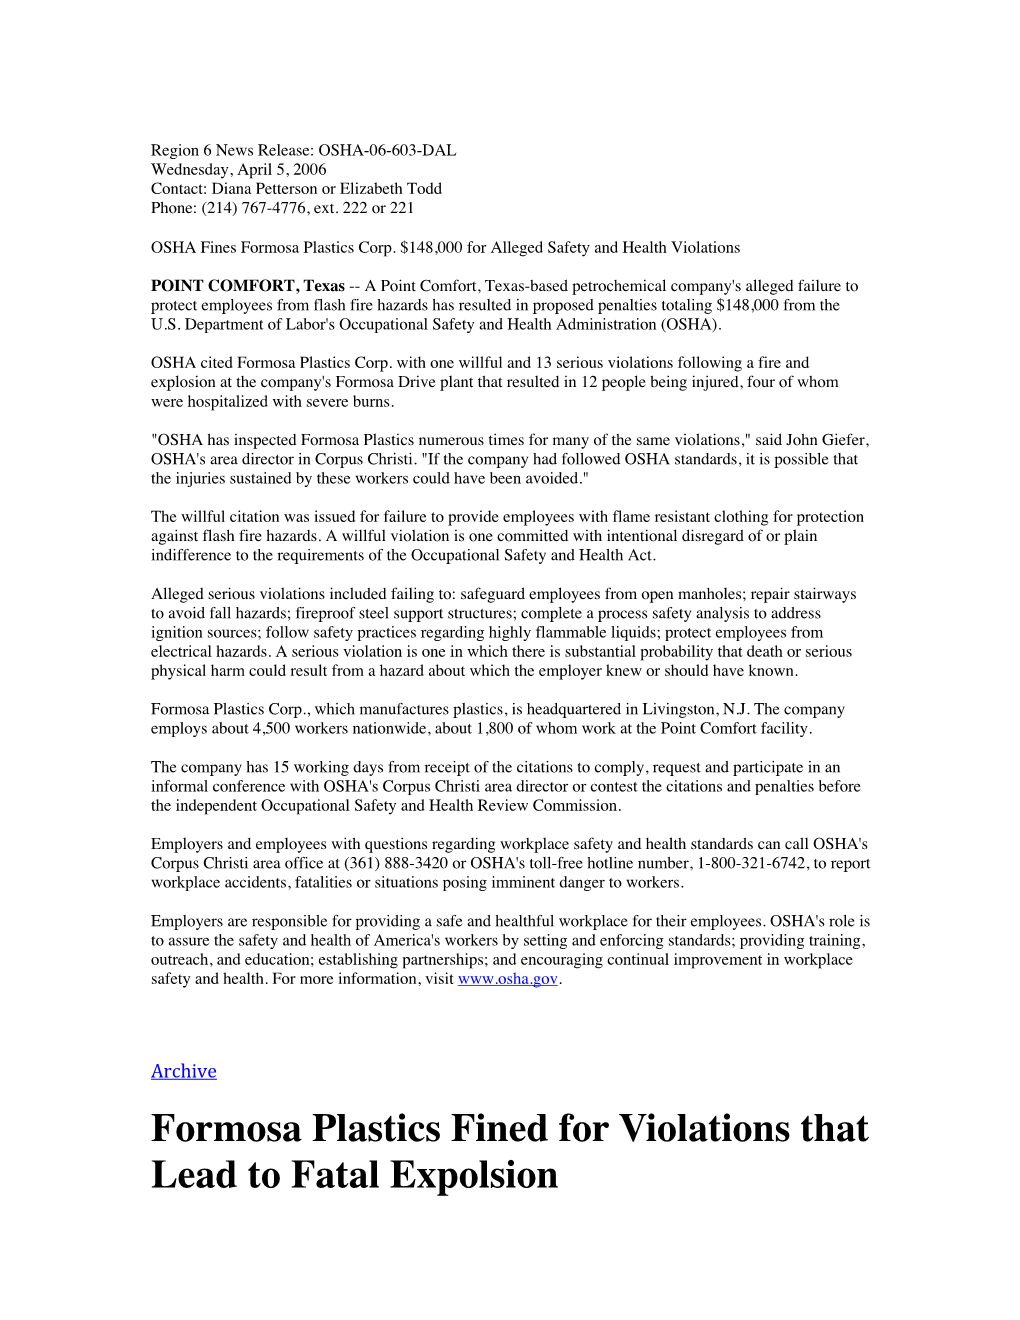 Formosa Plastics Fined for Violations That Lead to Fatal Expolsion OSHA Has Issued Citations and Proposed Penalties to Formosa Plastics Corp